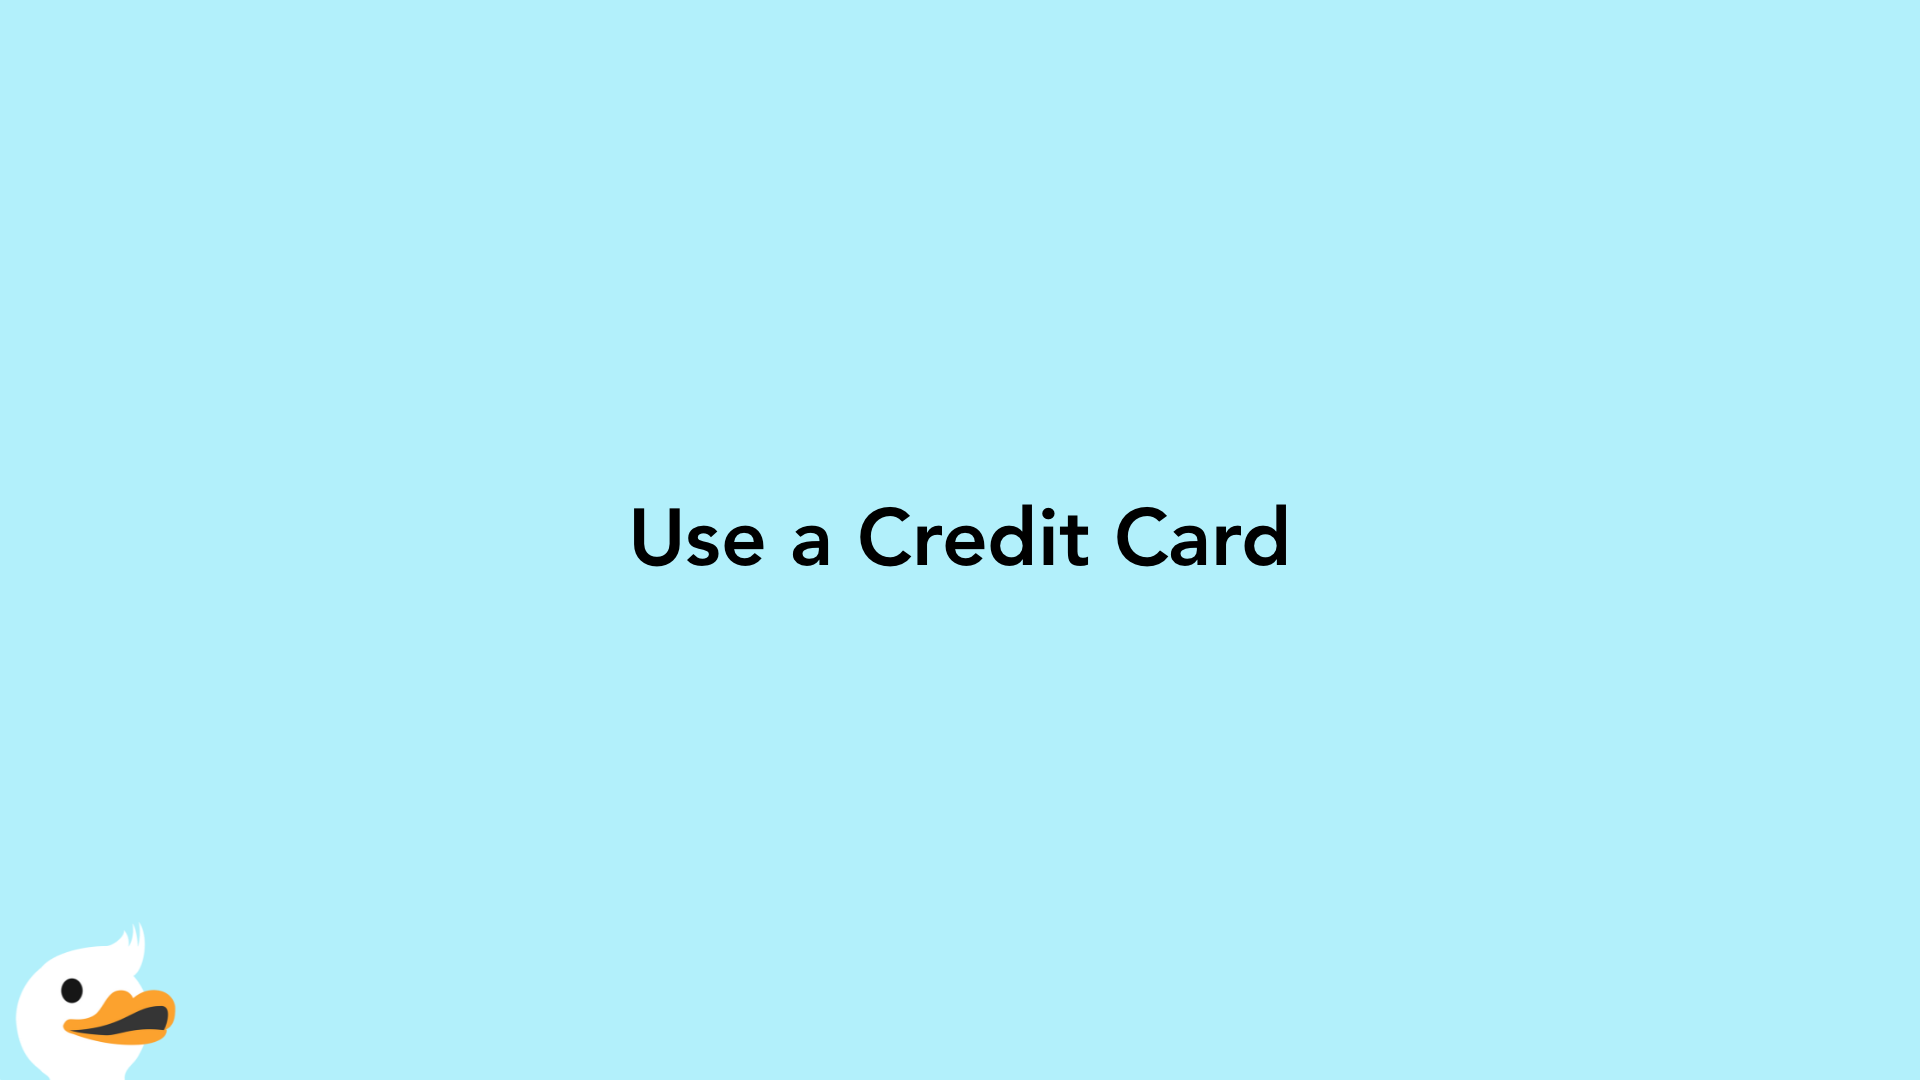 Use a Credit Card